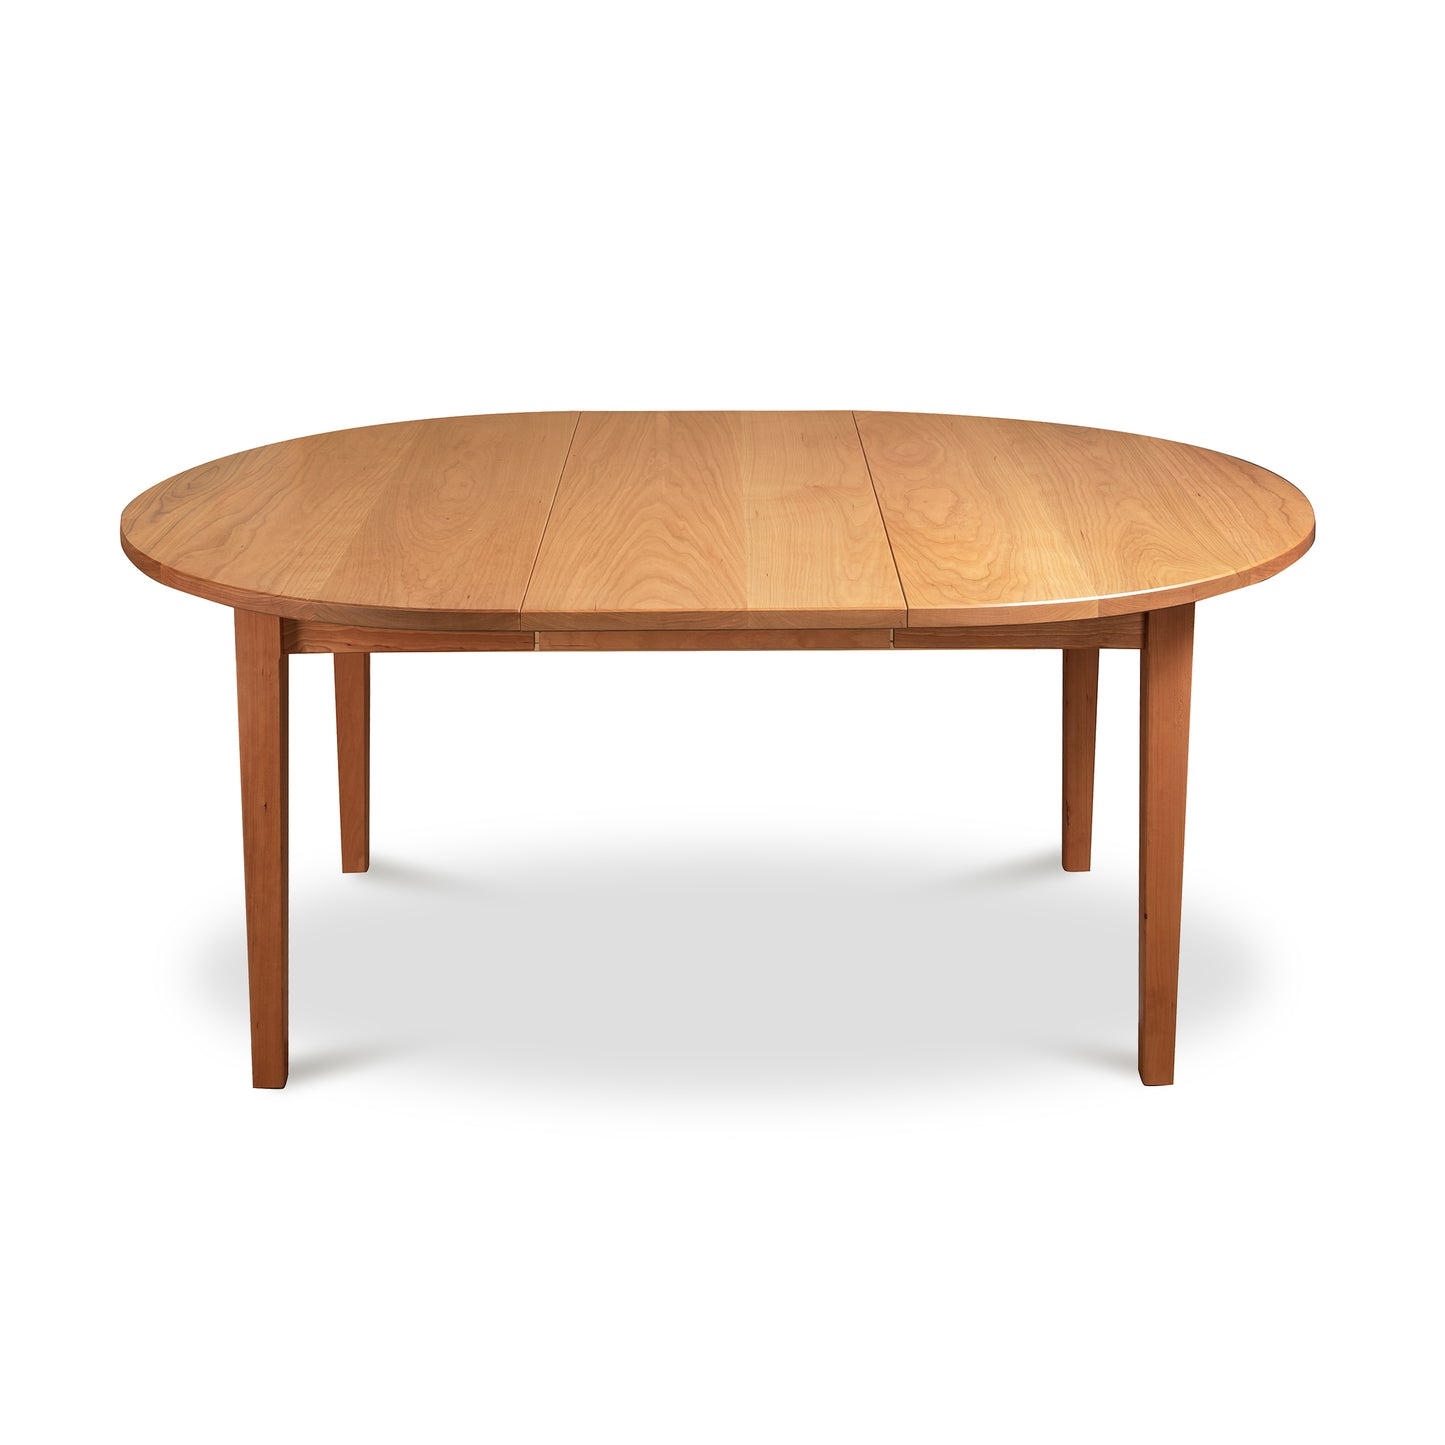 An oval wooden dining table crafted from natural cherry, with a smooth surface and four legs, isolated on a white background.
Product Name: Vermont Shaker Round Extension Table
Brand Name: Maple Corner Woodworks